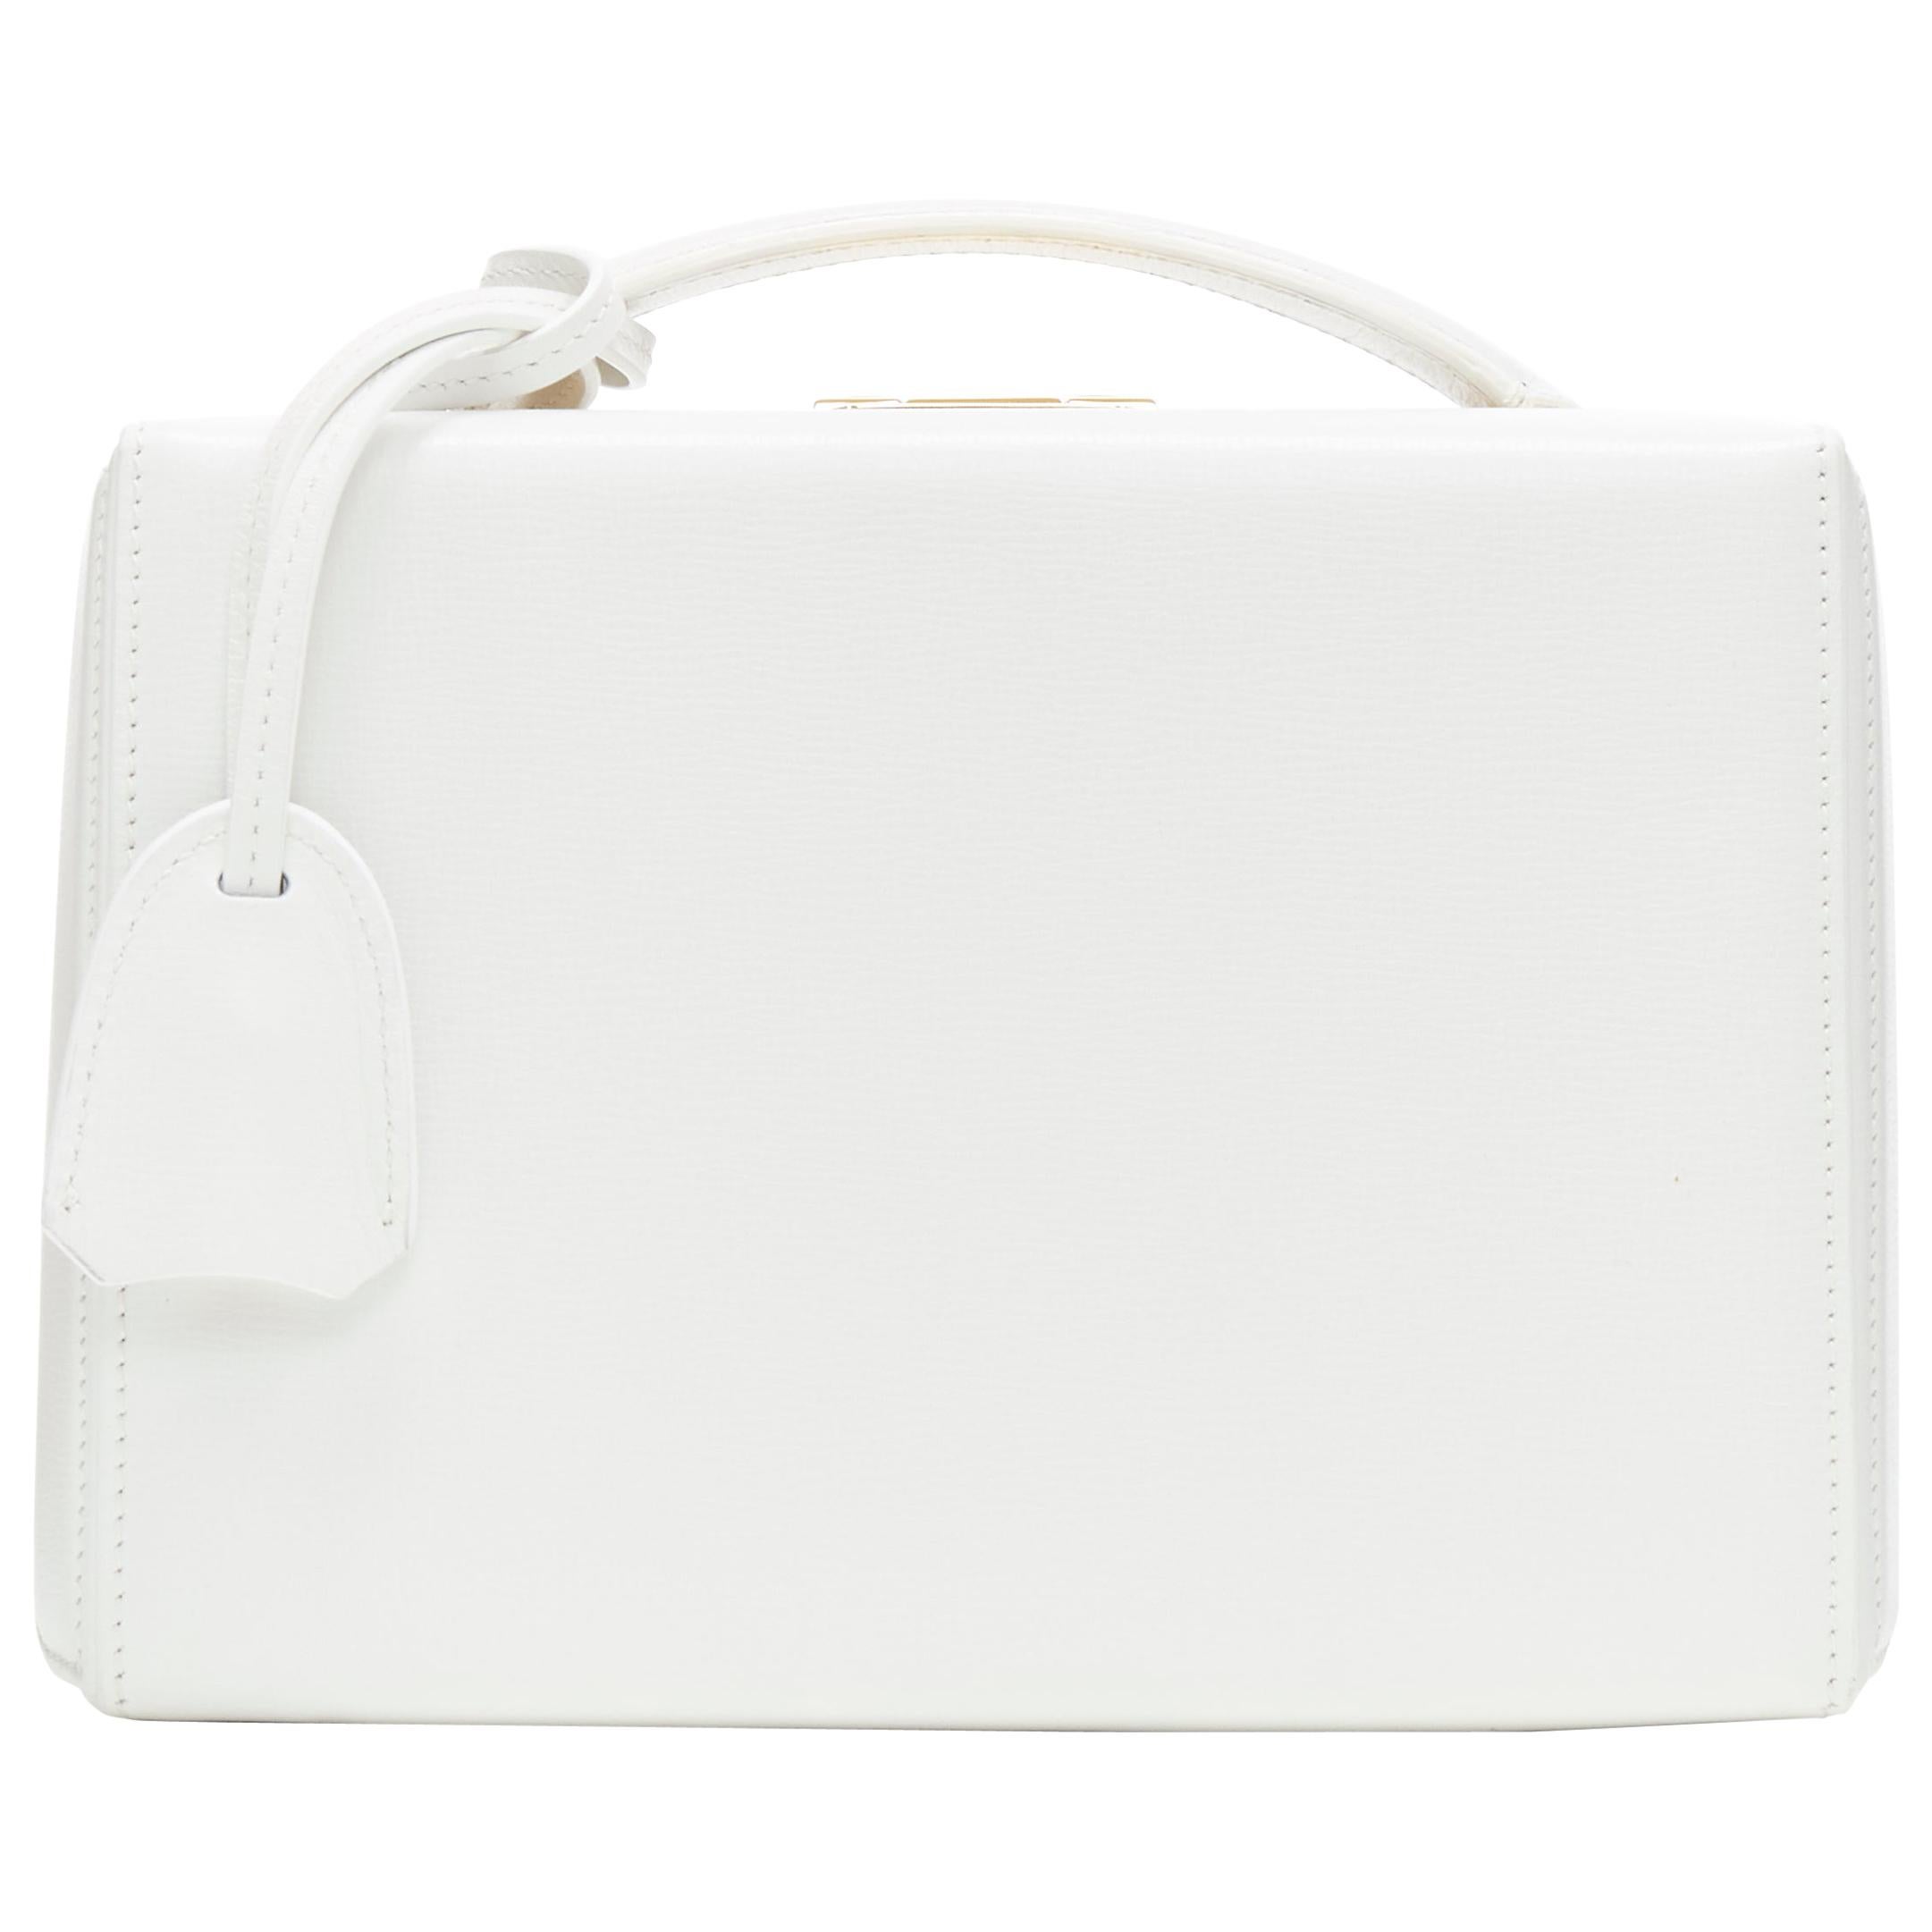 MARK CROSS Small Grace white leather gold top handle satchel vanity box bag